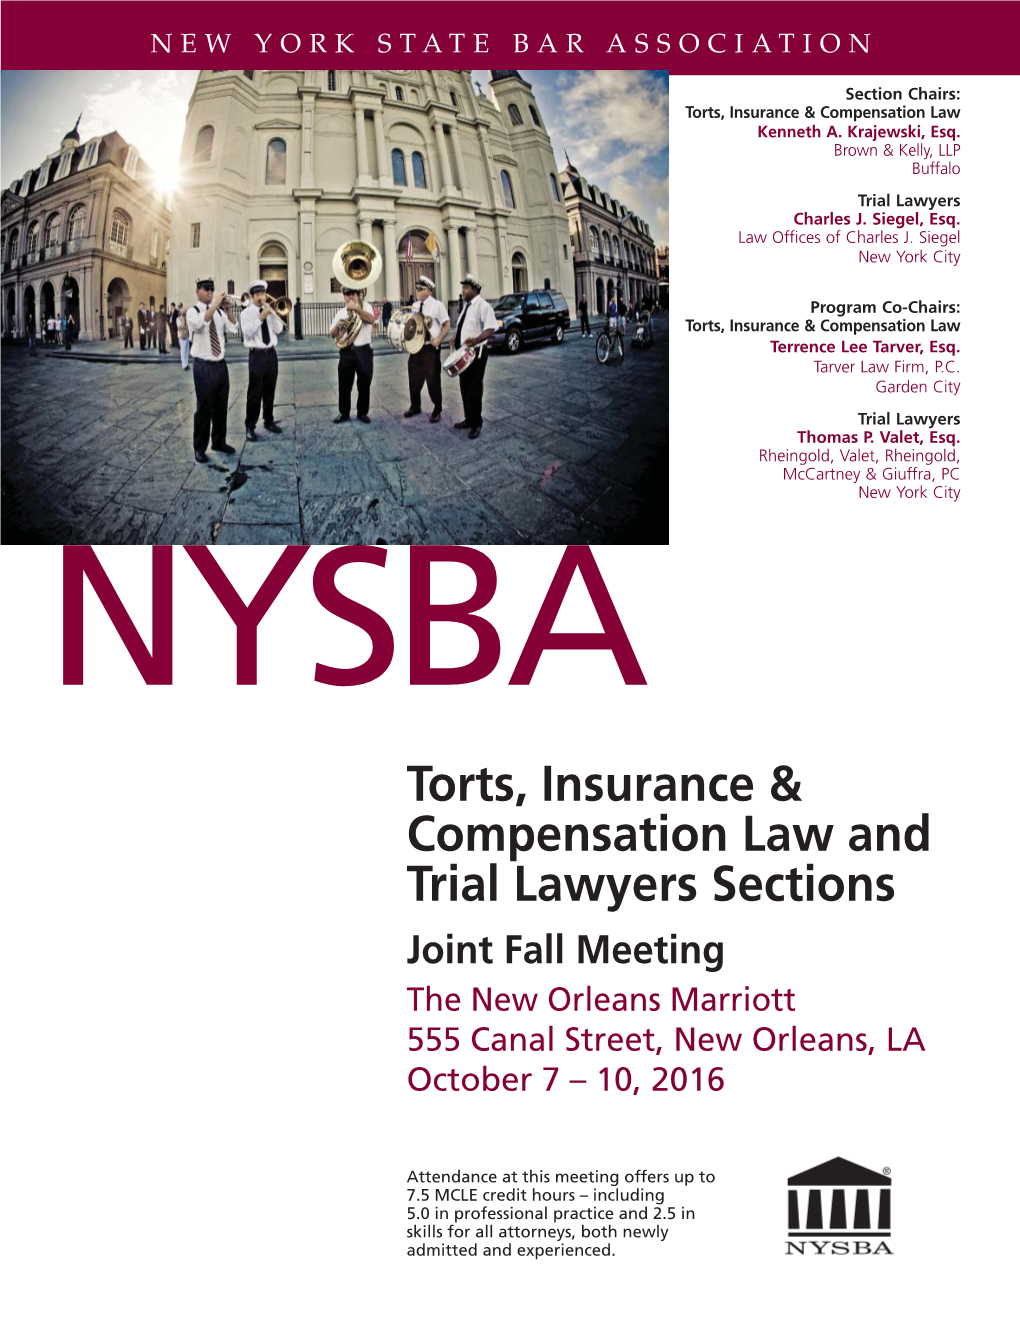 Torts, Insurance & Compensation Law and Trial Lawyers Sections